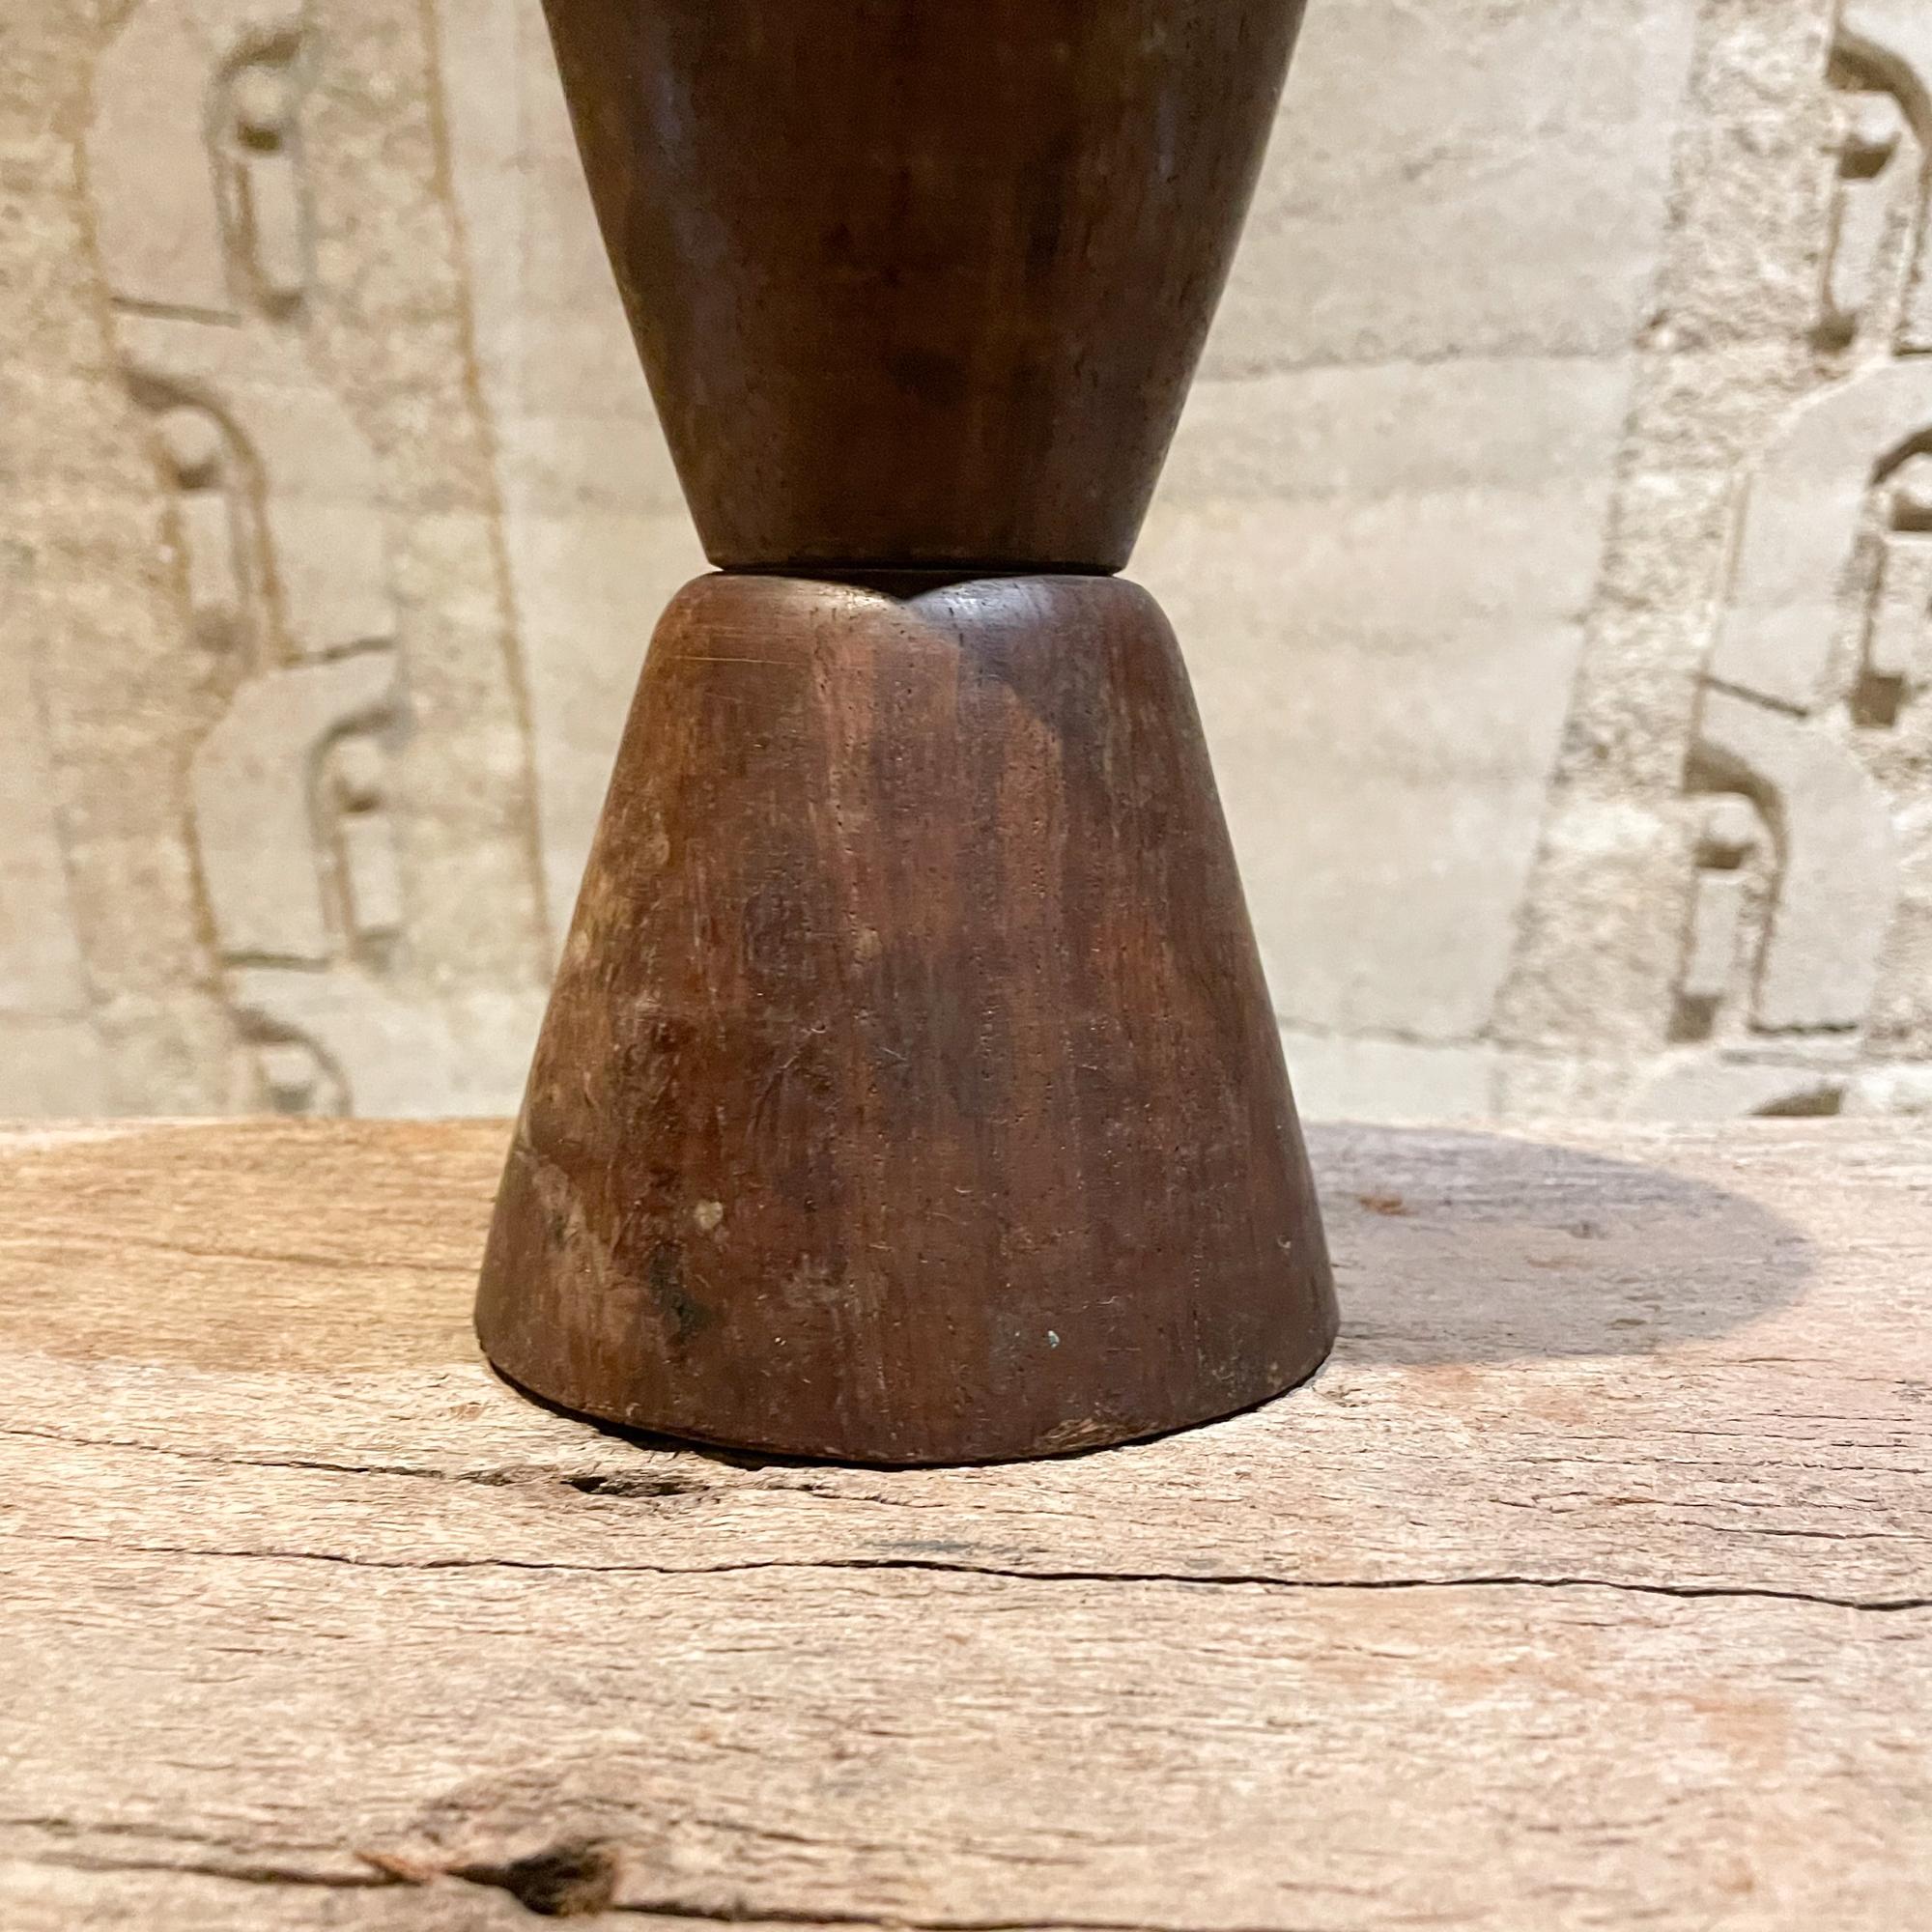 Heavy solid wood chalice cone shape vase in the manner of Don Shoemaker Made in Mexico 1970s
Crafted in Palo Fierro very heavy wood in a dark grain. Unmarked.
Measures: 11.5 height x 5 in diameter inches
Unrestored vintage condition. Refer to